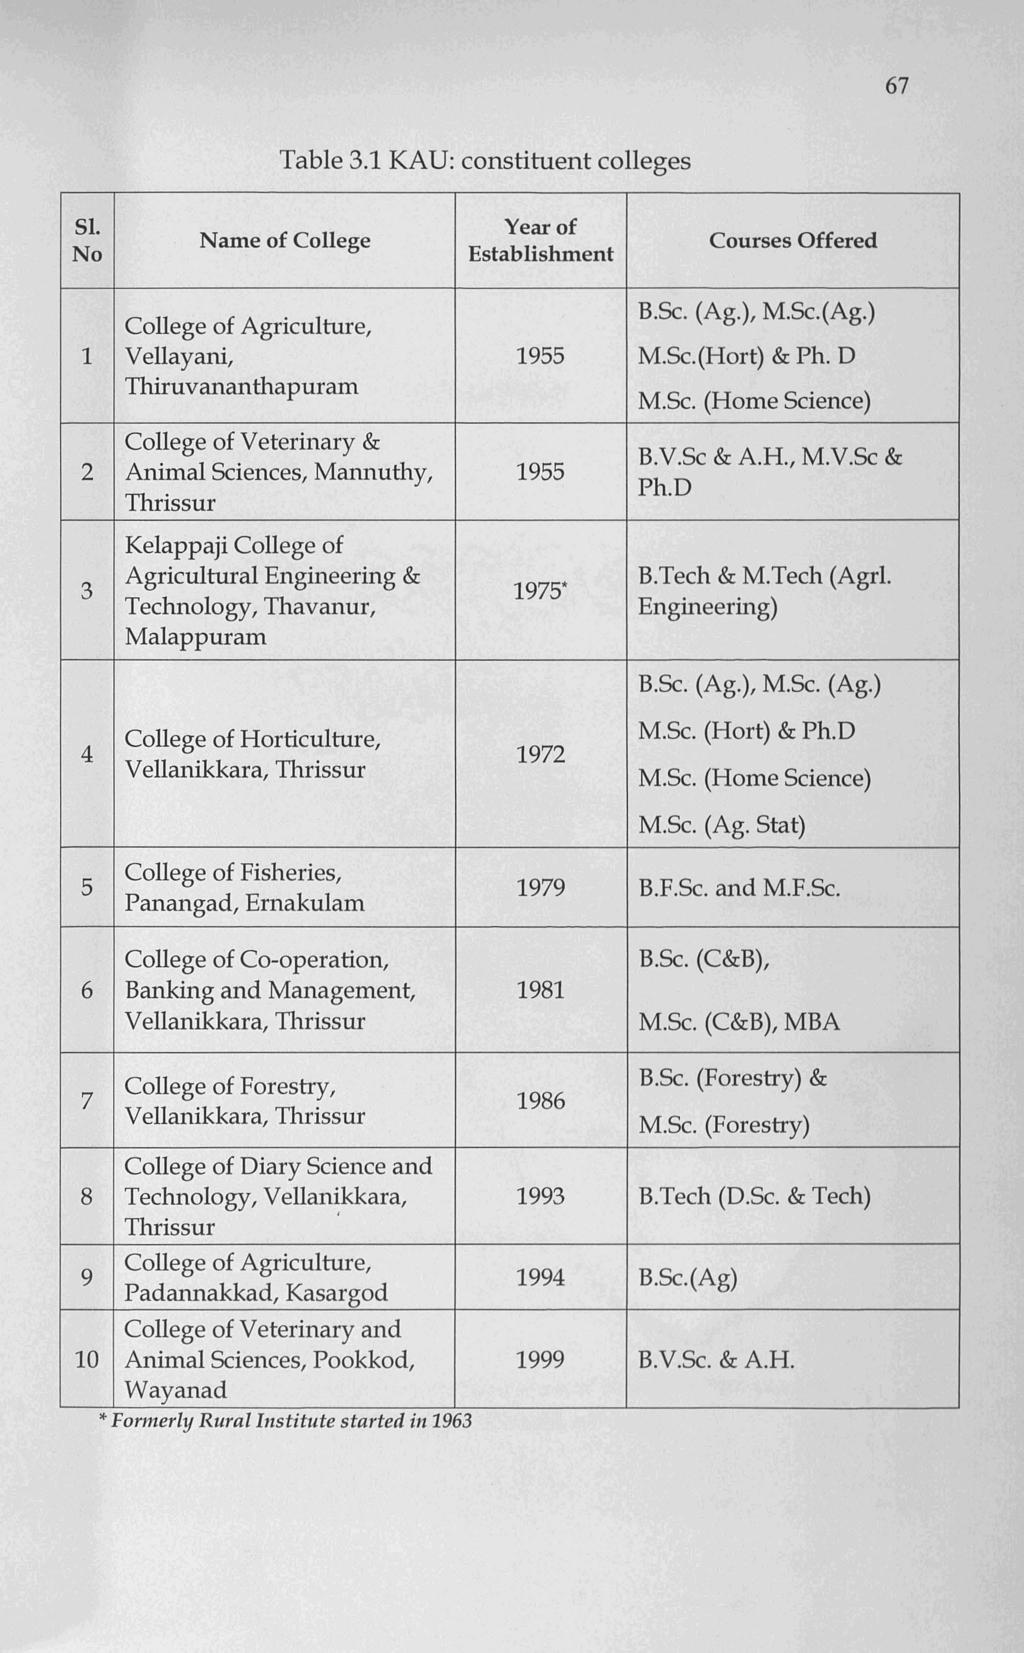 67 Table 3.1 KAU: constituent colleges 51. No Name of College Year of Establishment Courses Offered College of Agriculture, BSc. (Ag.), M.Sc.(Ag.) 1 Vellayani, 1955 MSc.(Hort) & Ph.